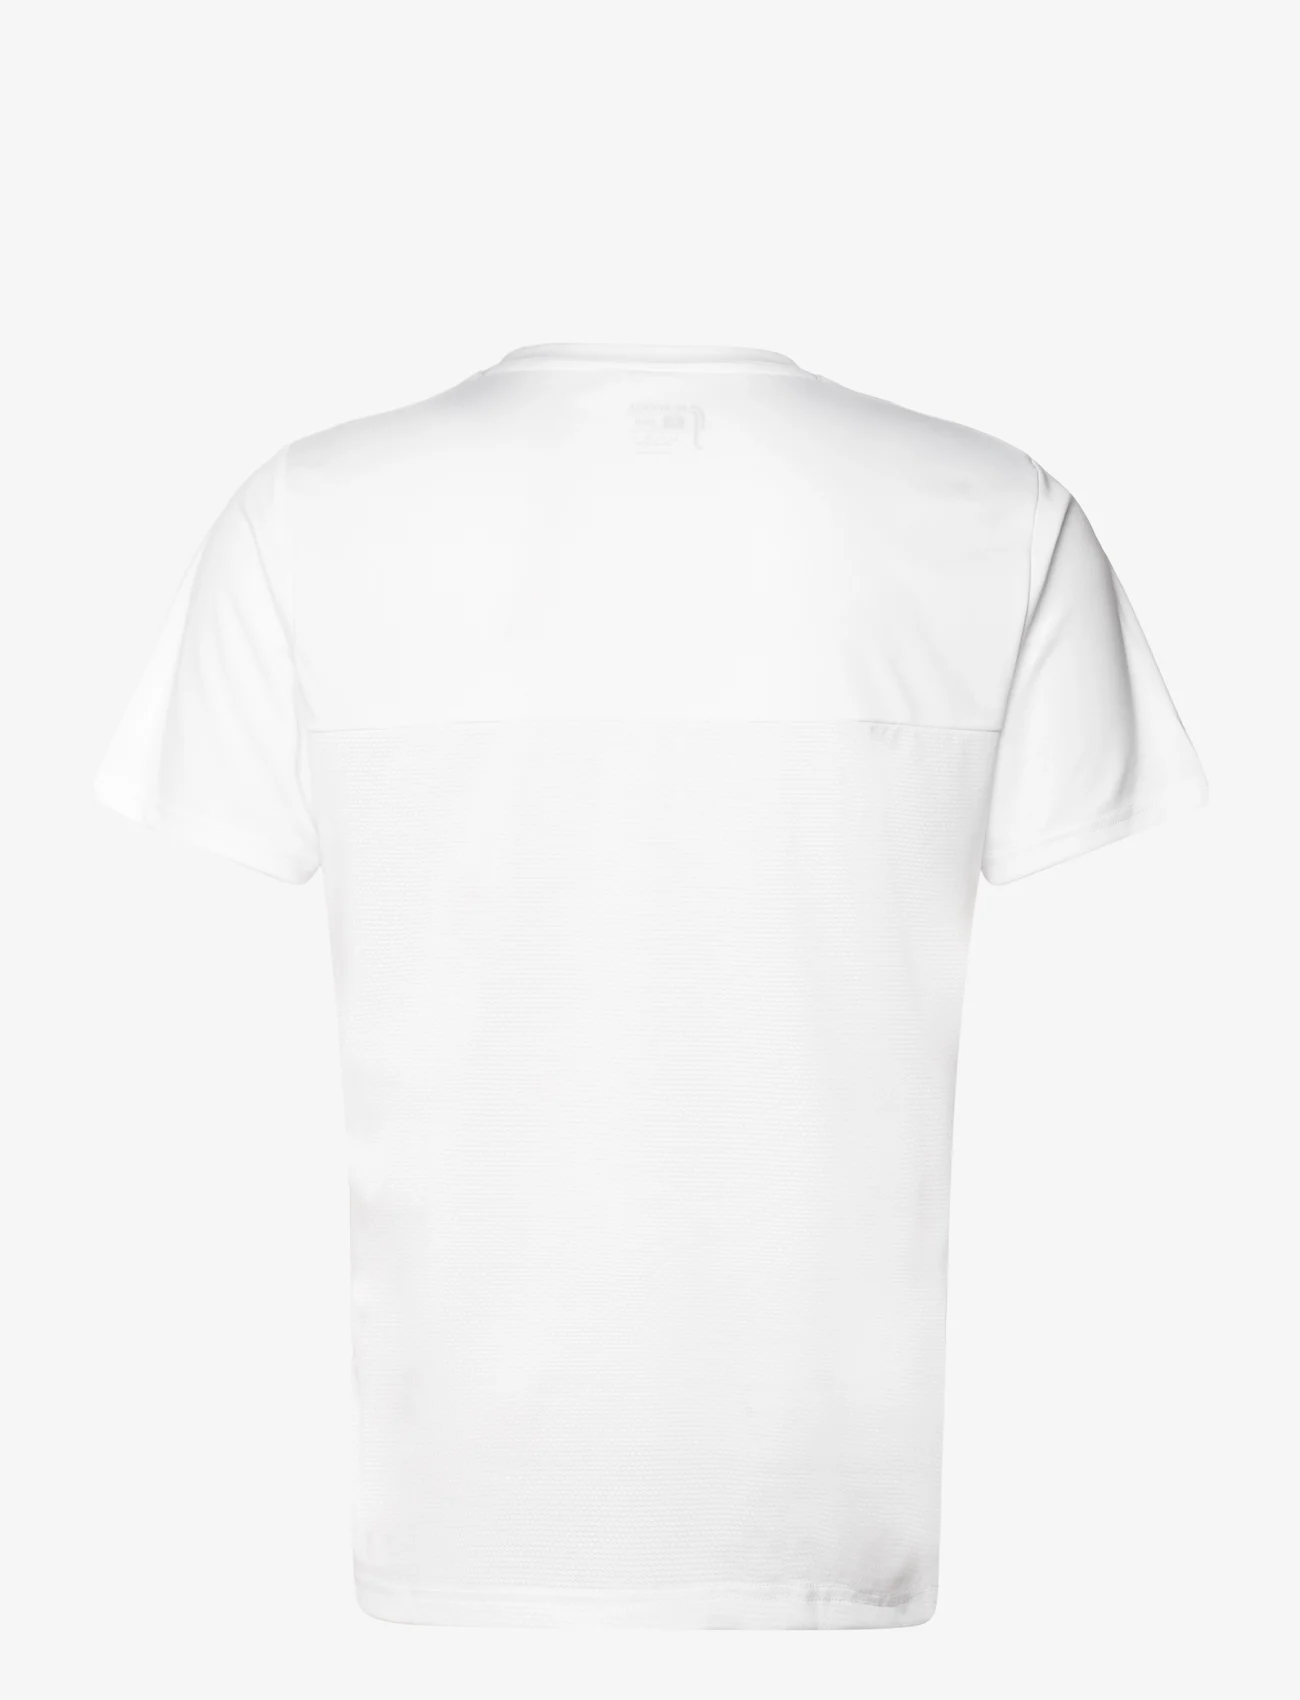 RS Sports - Men’s Performance Tee - short-sleeved t-shirts - white - 1